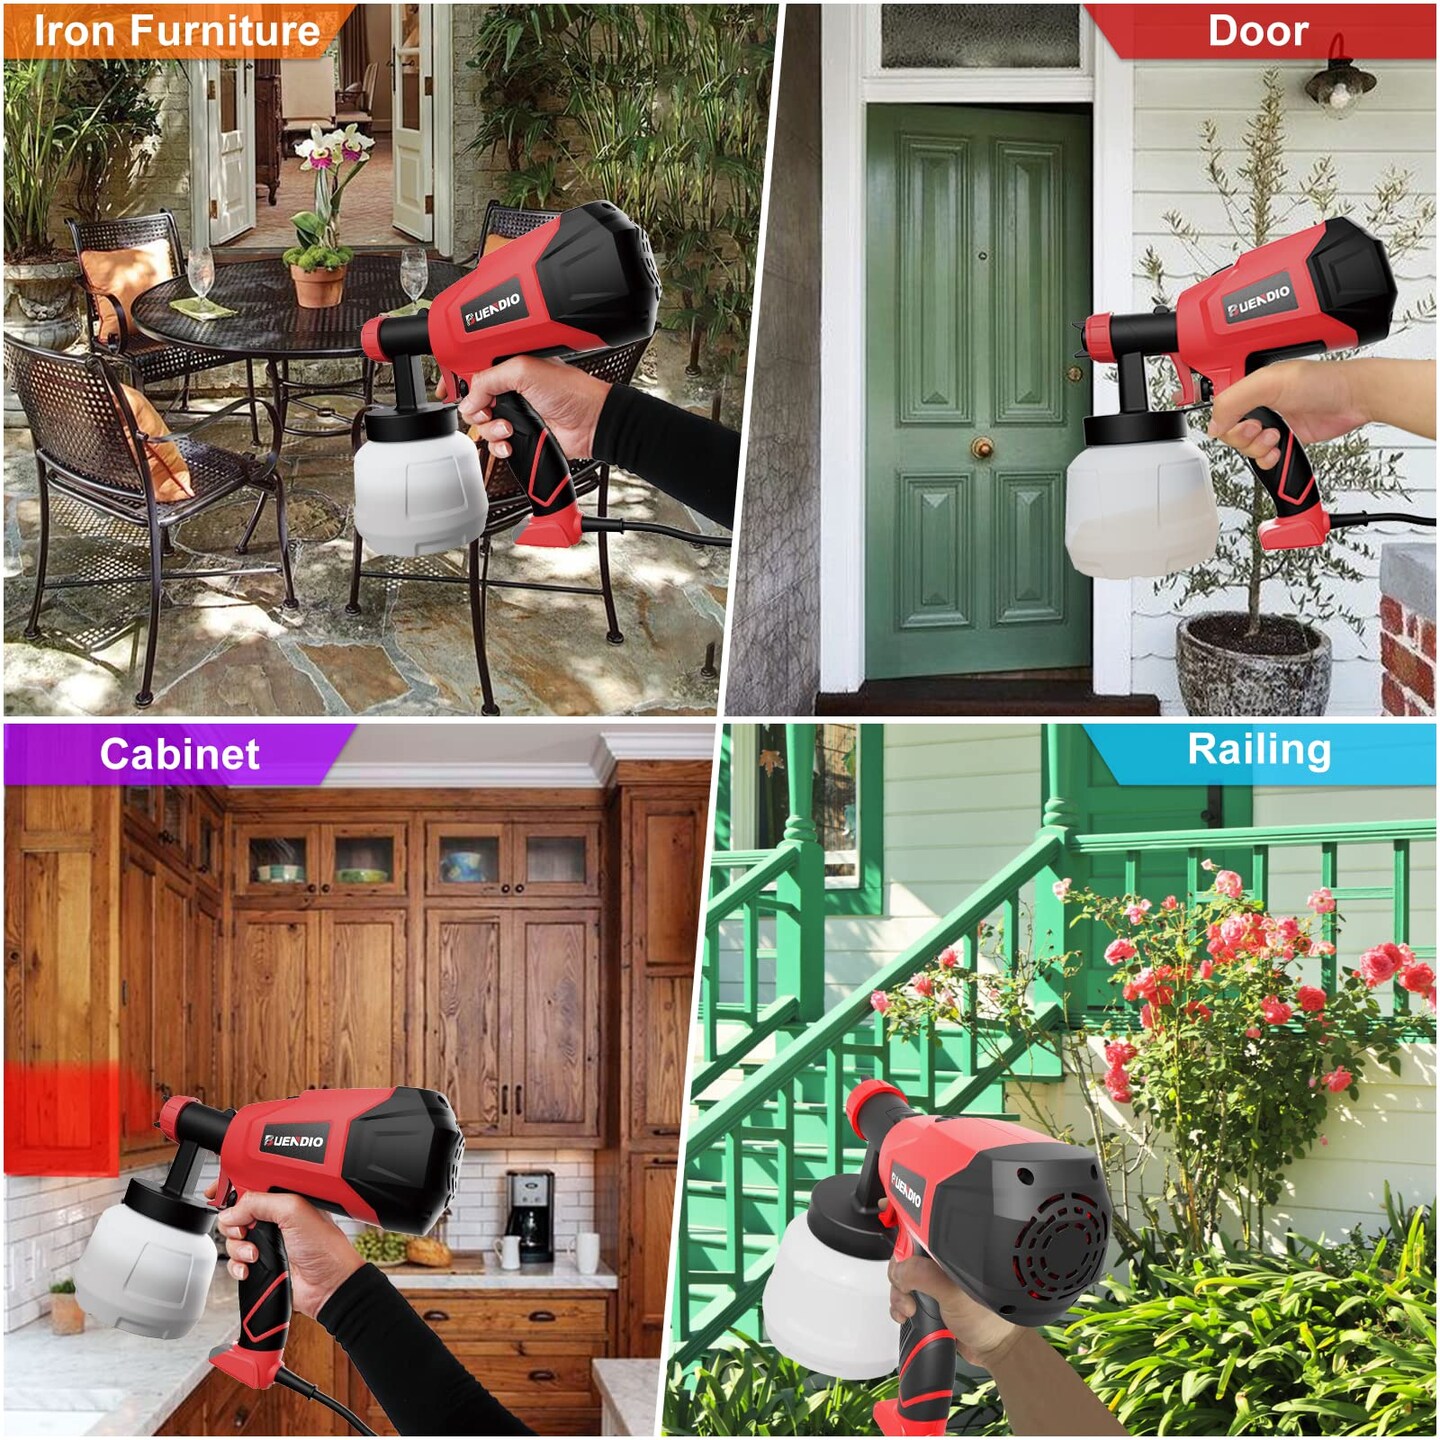 BUENDIO Paint Sprayer, 700W High Power, 5 Copper Nozzles &#x26; 3 Patterns, Easy to Clean, HVLP Spray Gun for Furniture, Cabinets, Fence, Garden Chairs, Walls, DIY Works etc. TPX01 Red